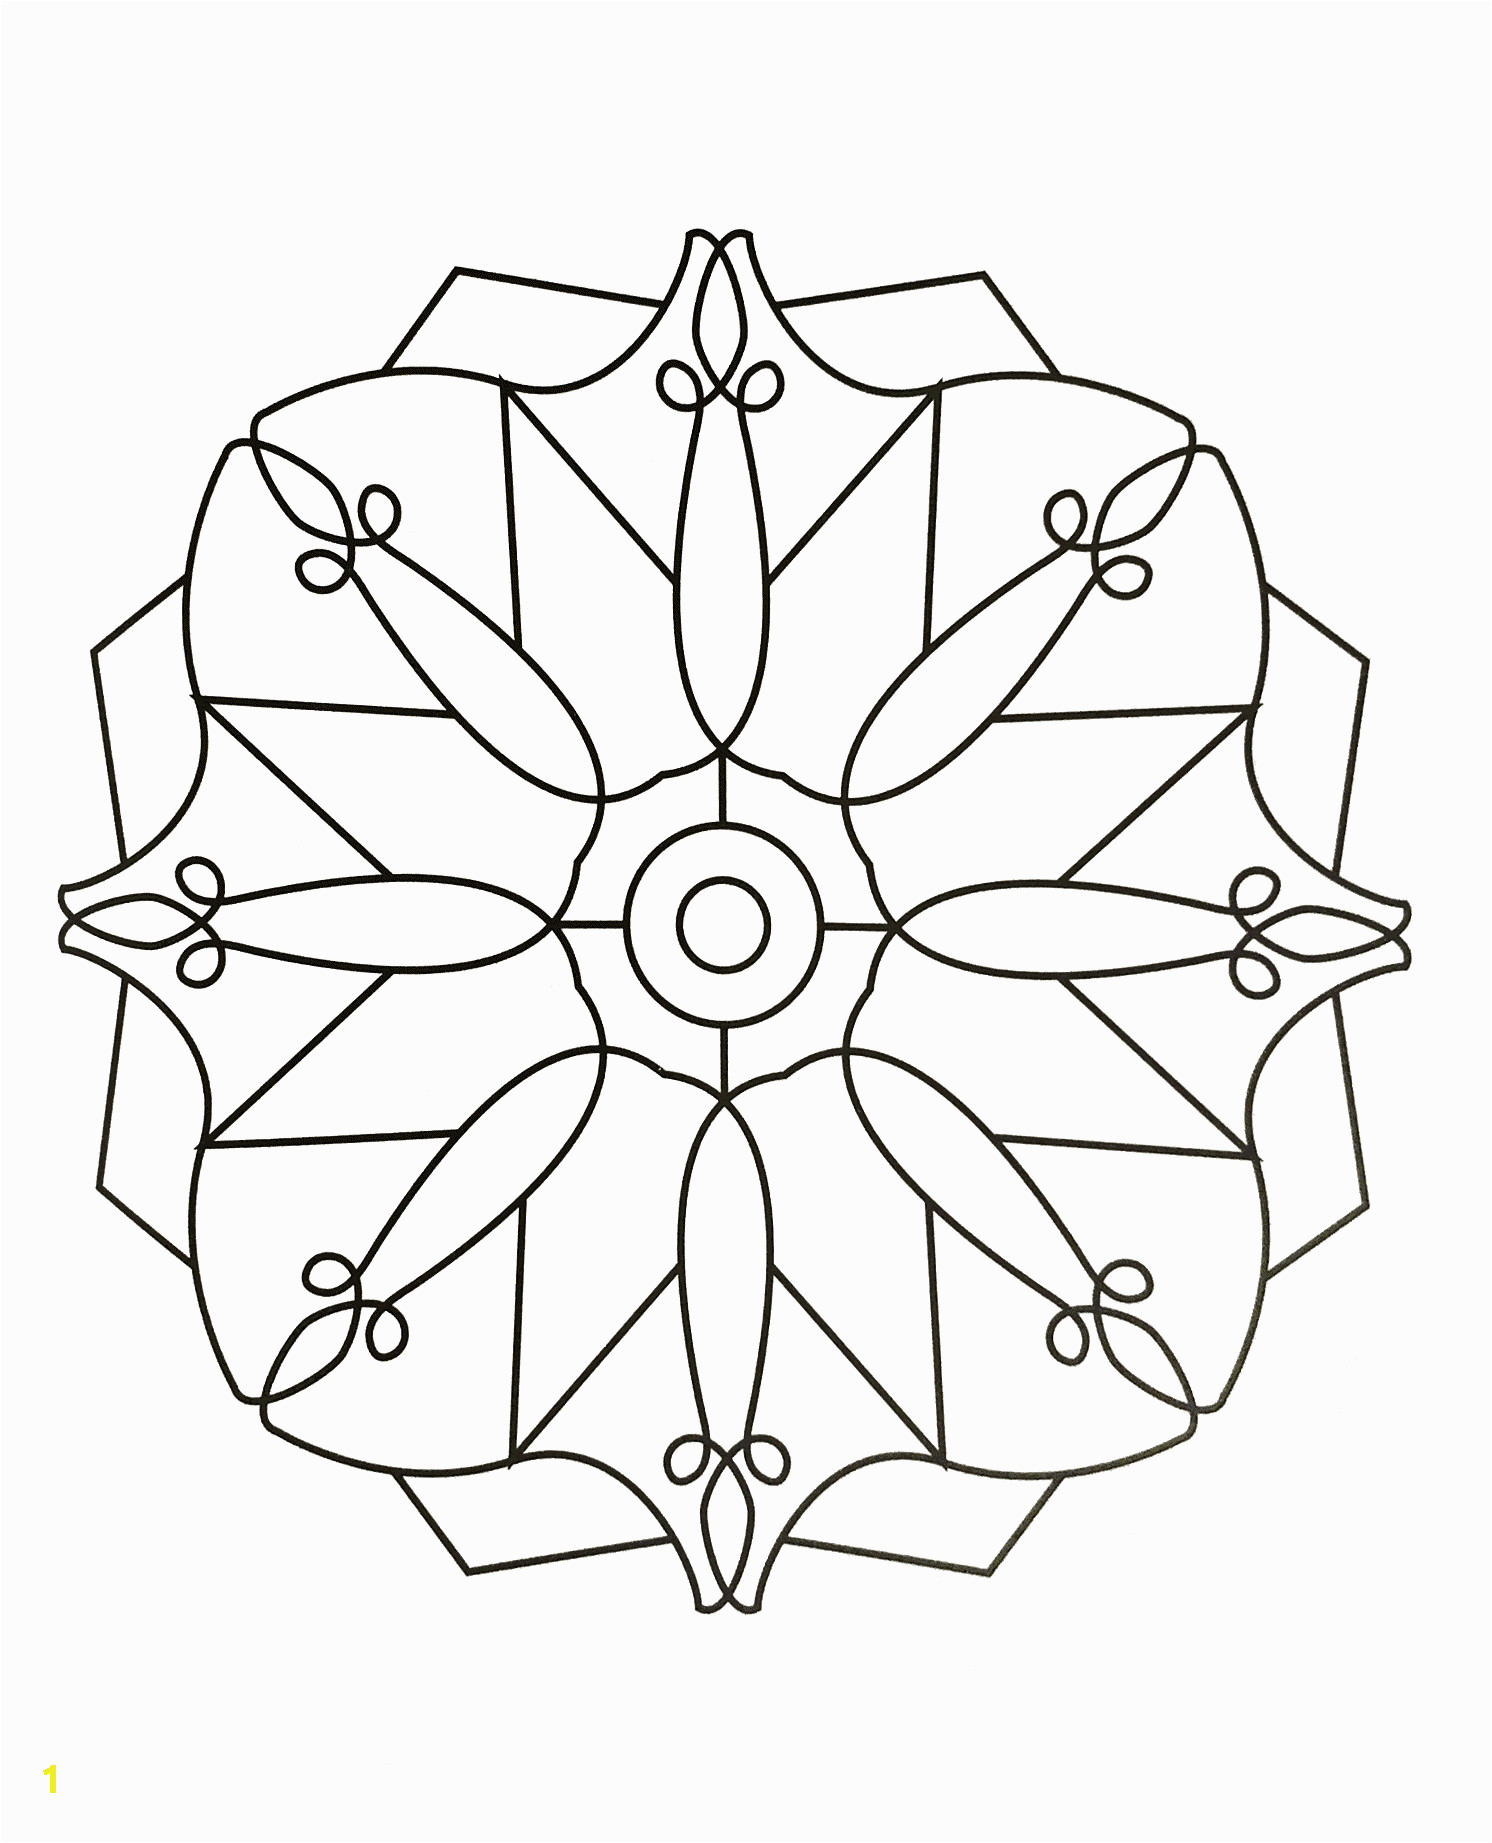 Easy Mandala Coloring Pages for Kids Simple Mandala 85 M&alas Coloring Pages for Kids to